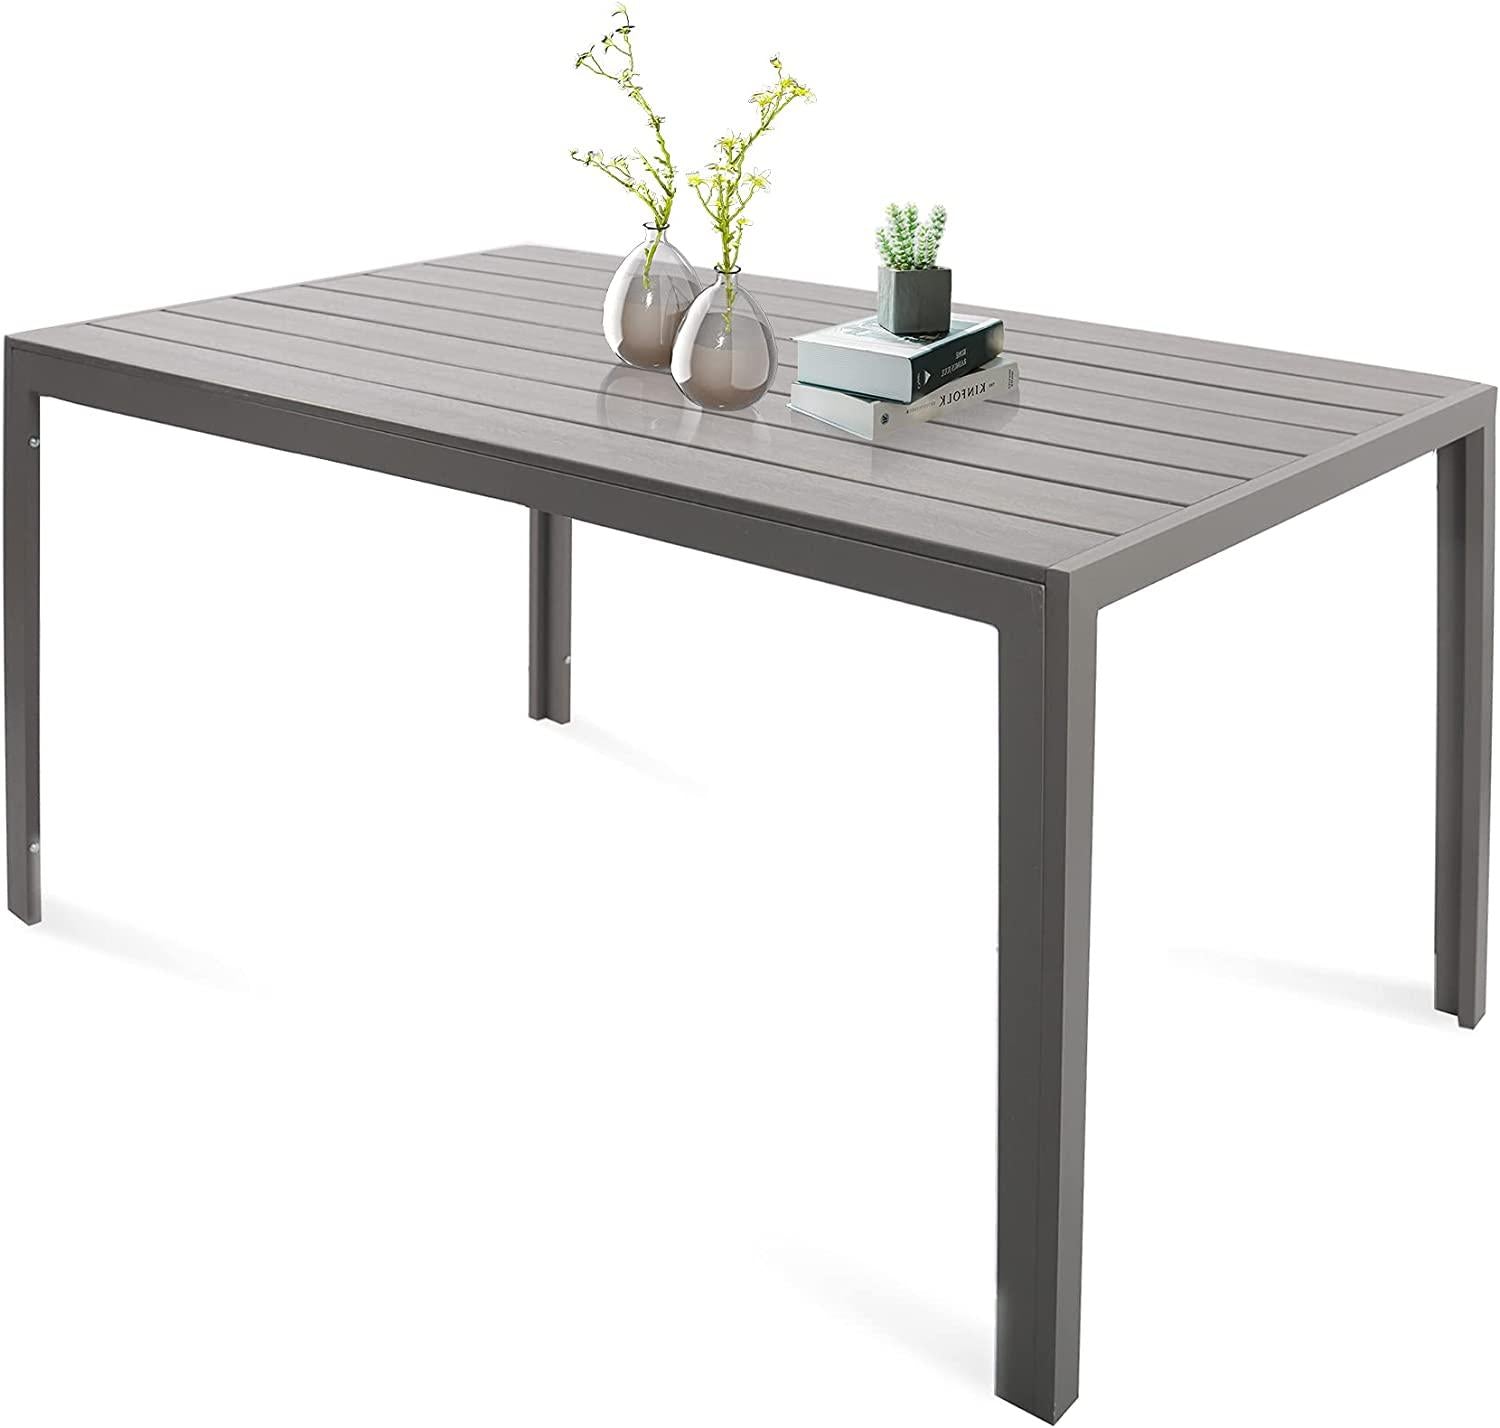 Outdoor Patio 55" Rectangular Dining Table for 6 Metal Aluminum Frame with Grey Wood Look